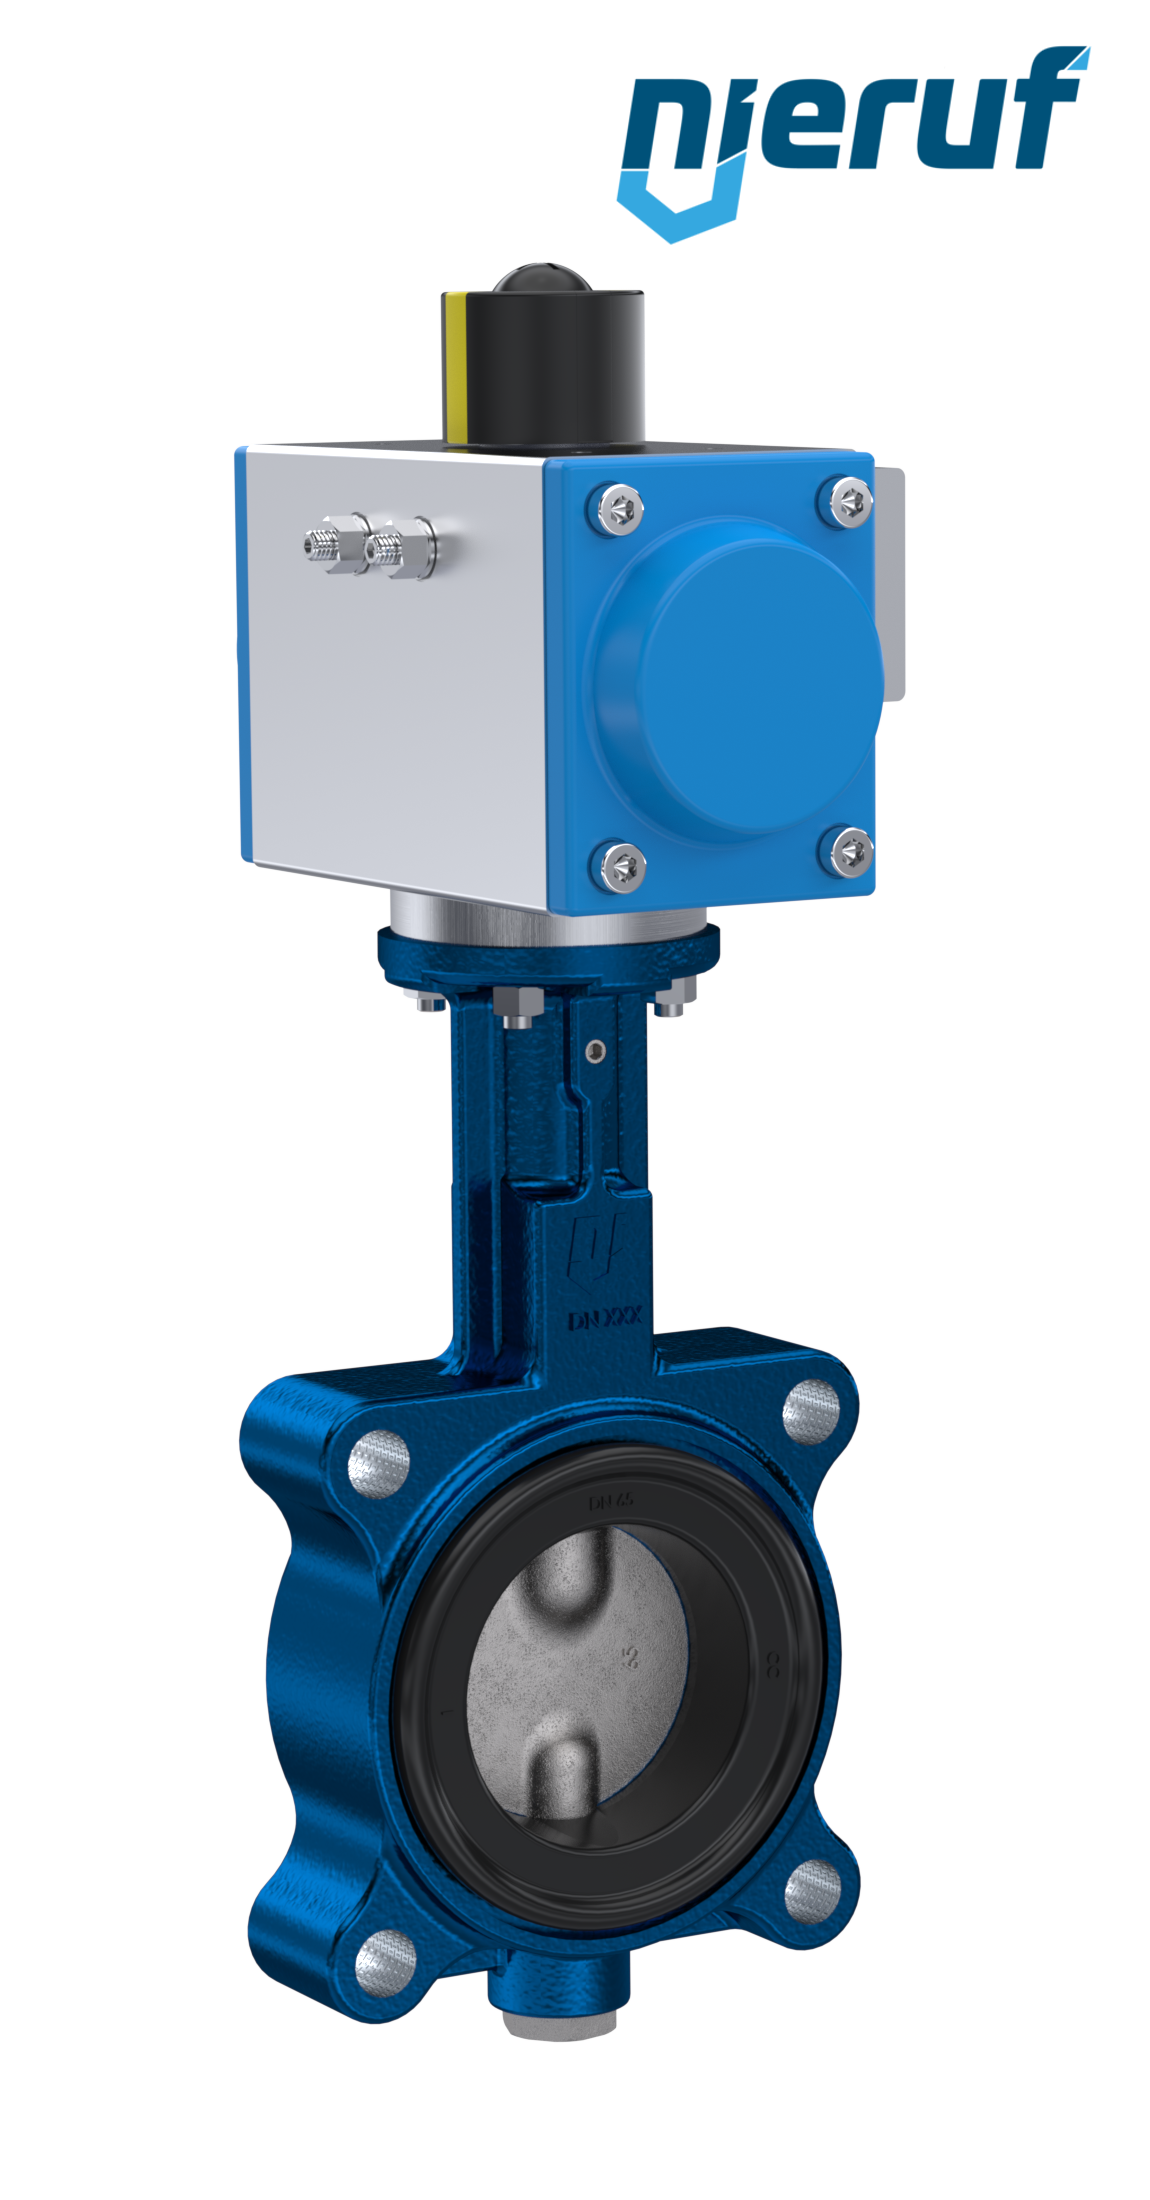 Butterfly valve DN 40 AK02 EPDM DVGW drinking water, WRAS, ACS, W270 pneumatic actuator double acting